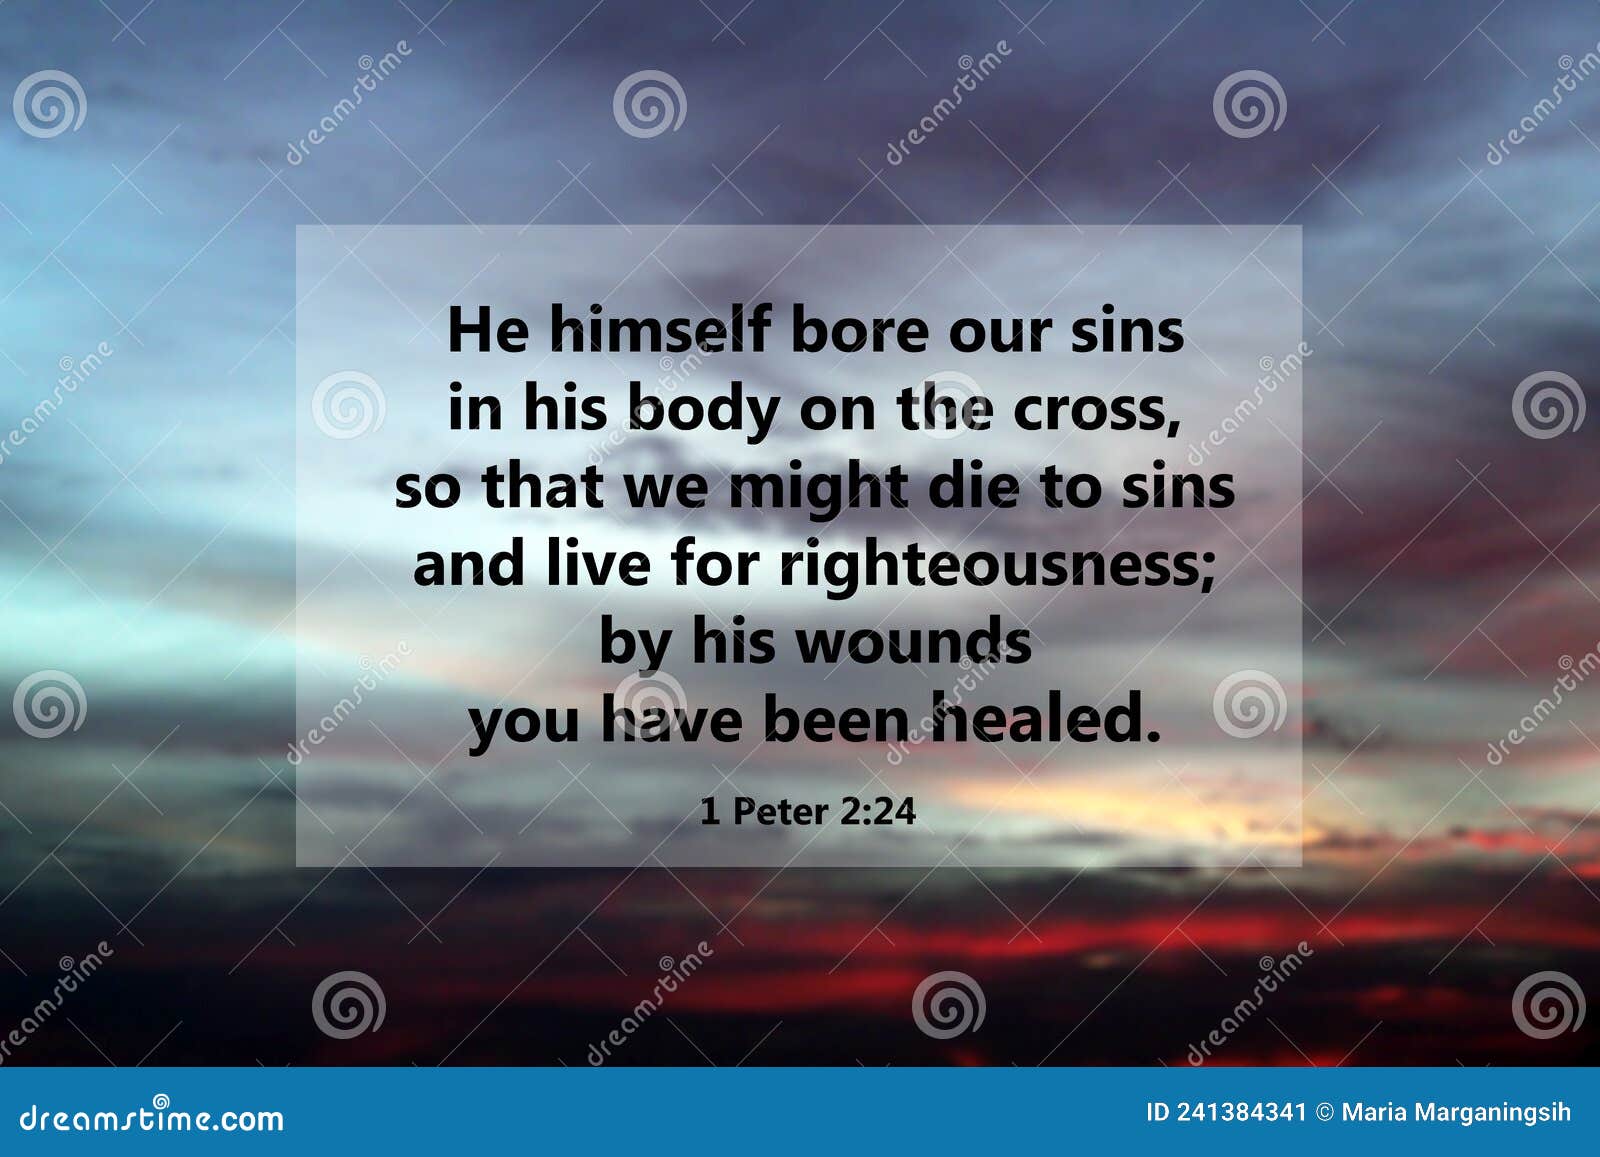 bible verse quote - him himself bore our sins in his body on the cross, so that we might die to sins and live for righteousness